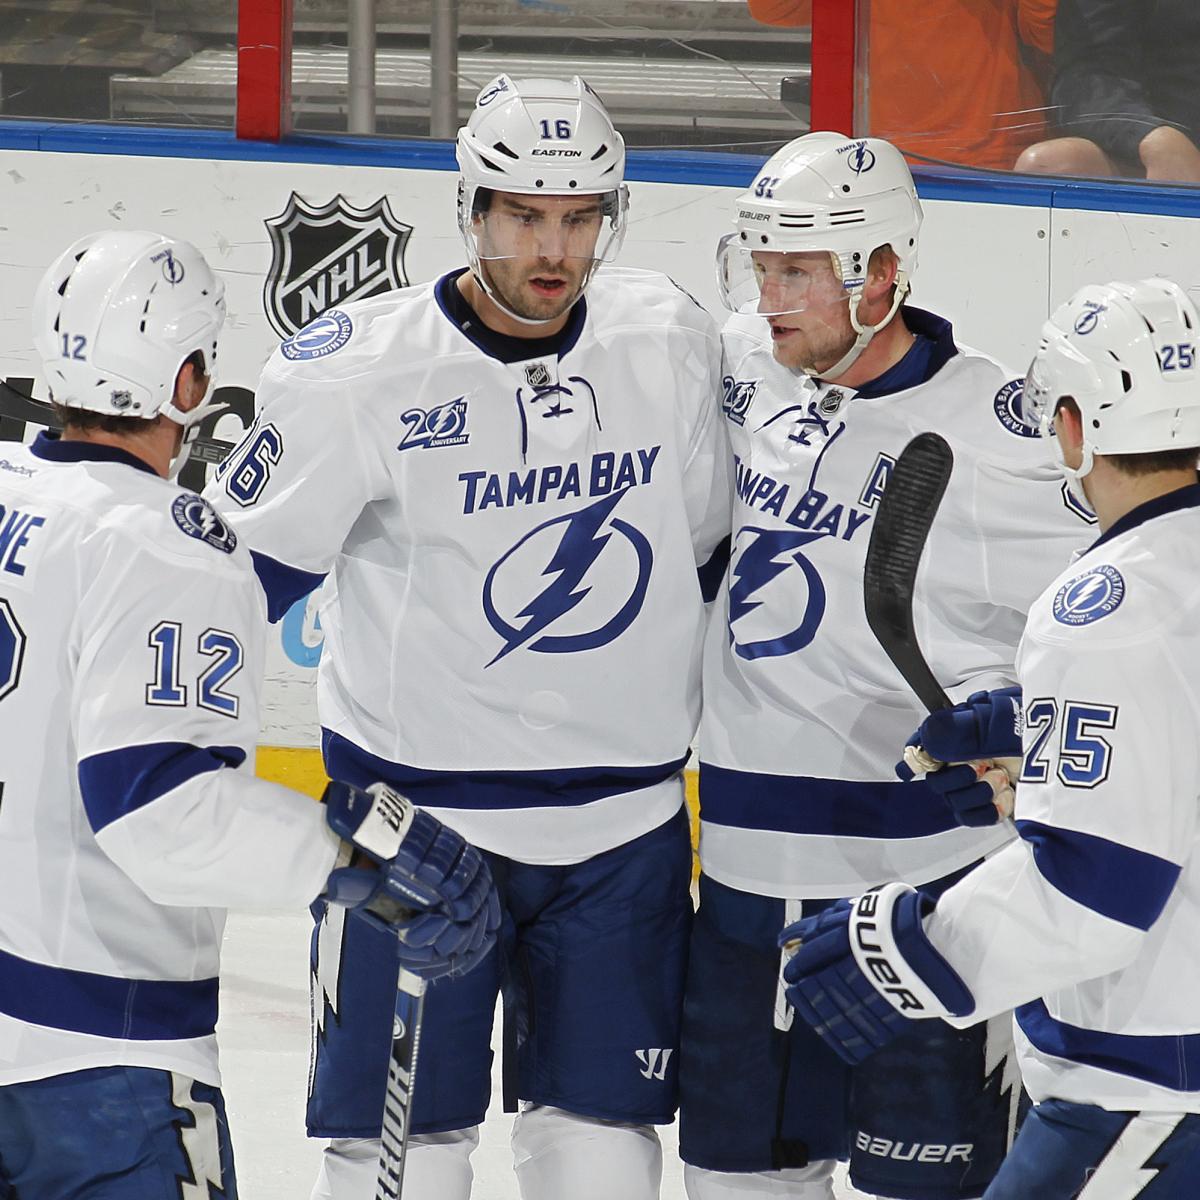 NHL 2013 Realignment: Tampa Bay Lightning's New Divisional Rivals